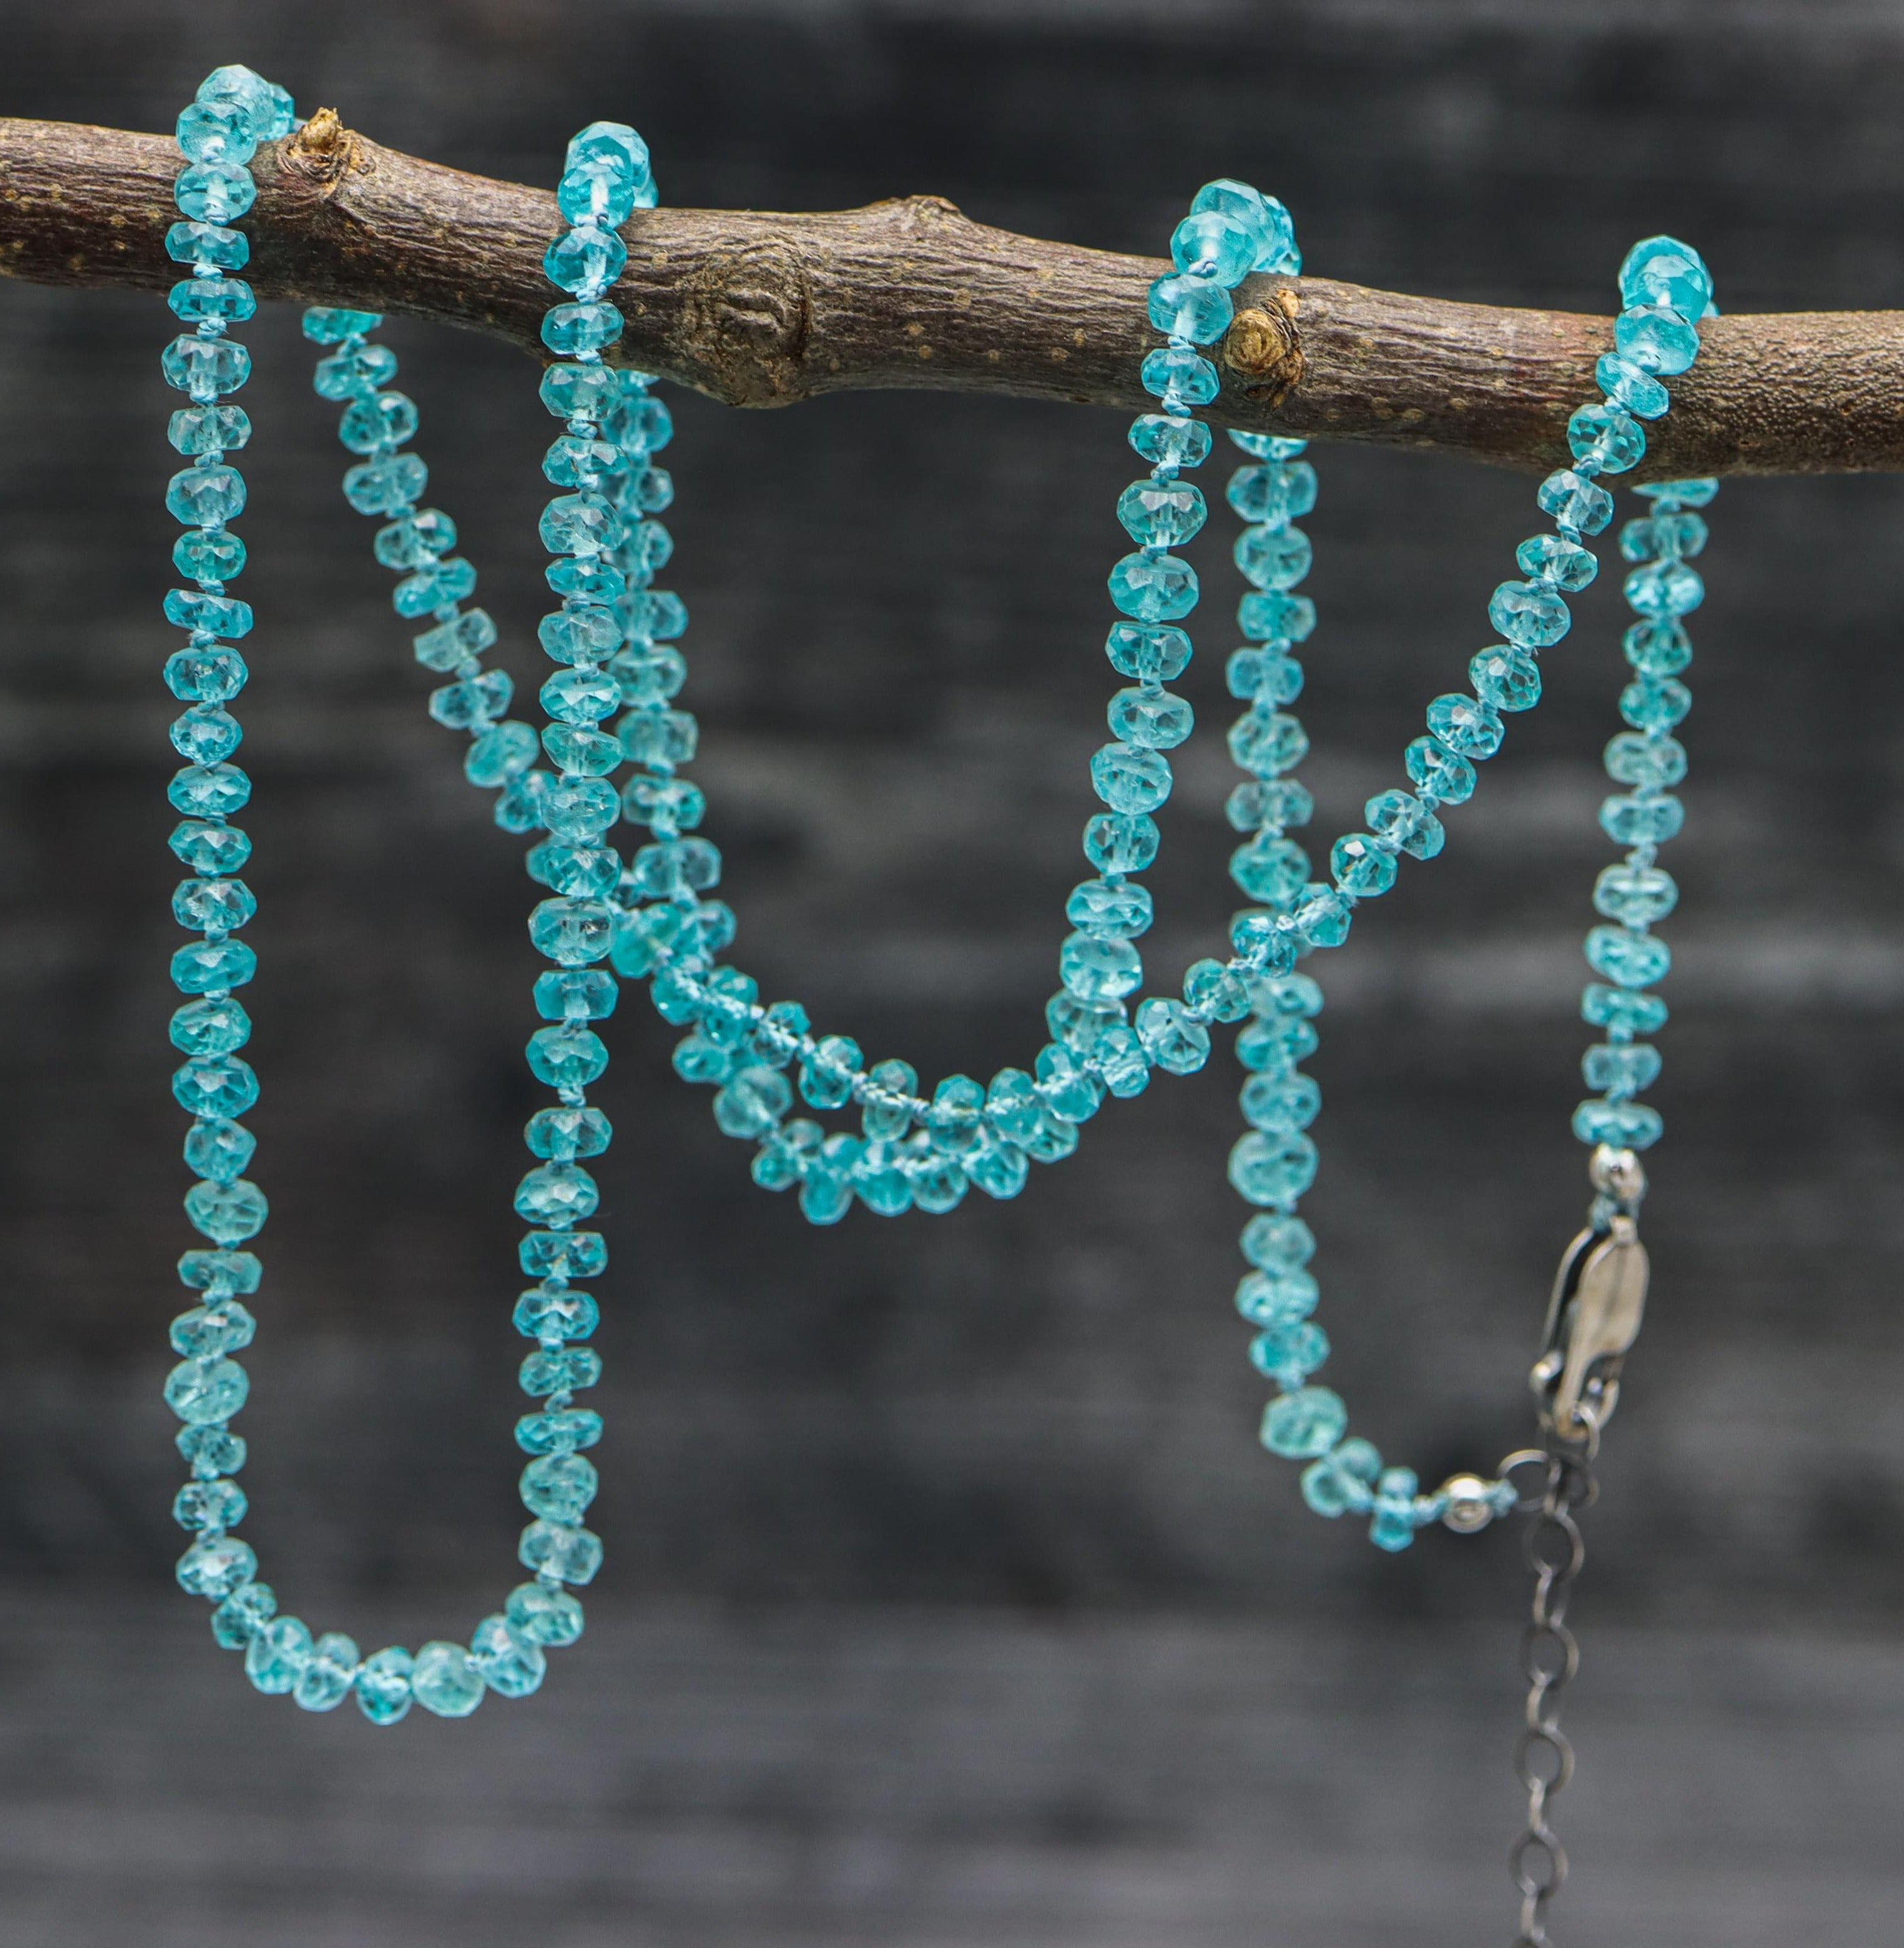 Neon Blue Apatite Hand Knotted Bead Necklace Sterling Silver